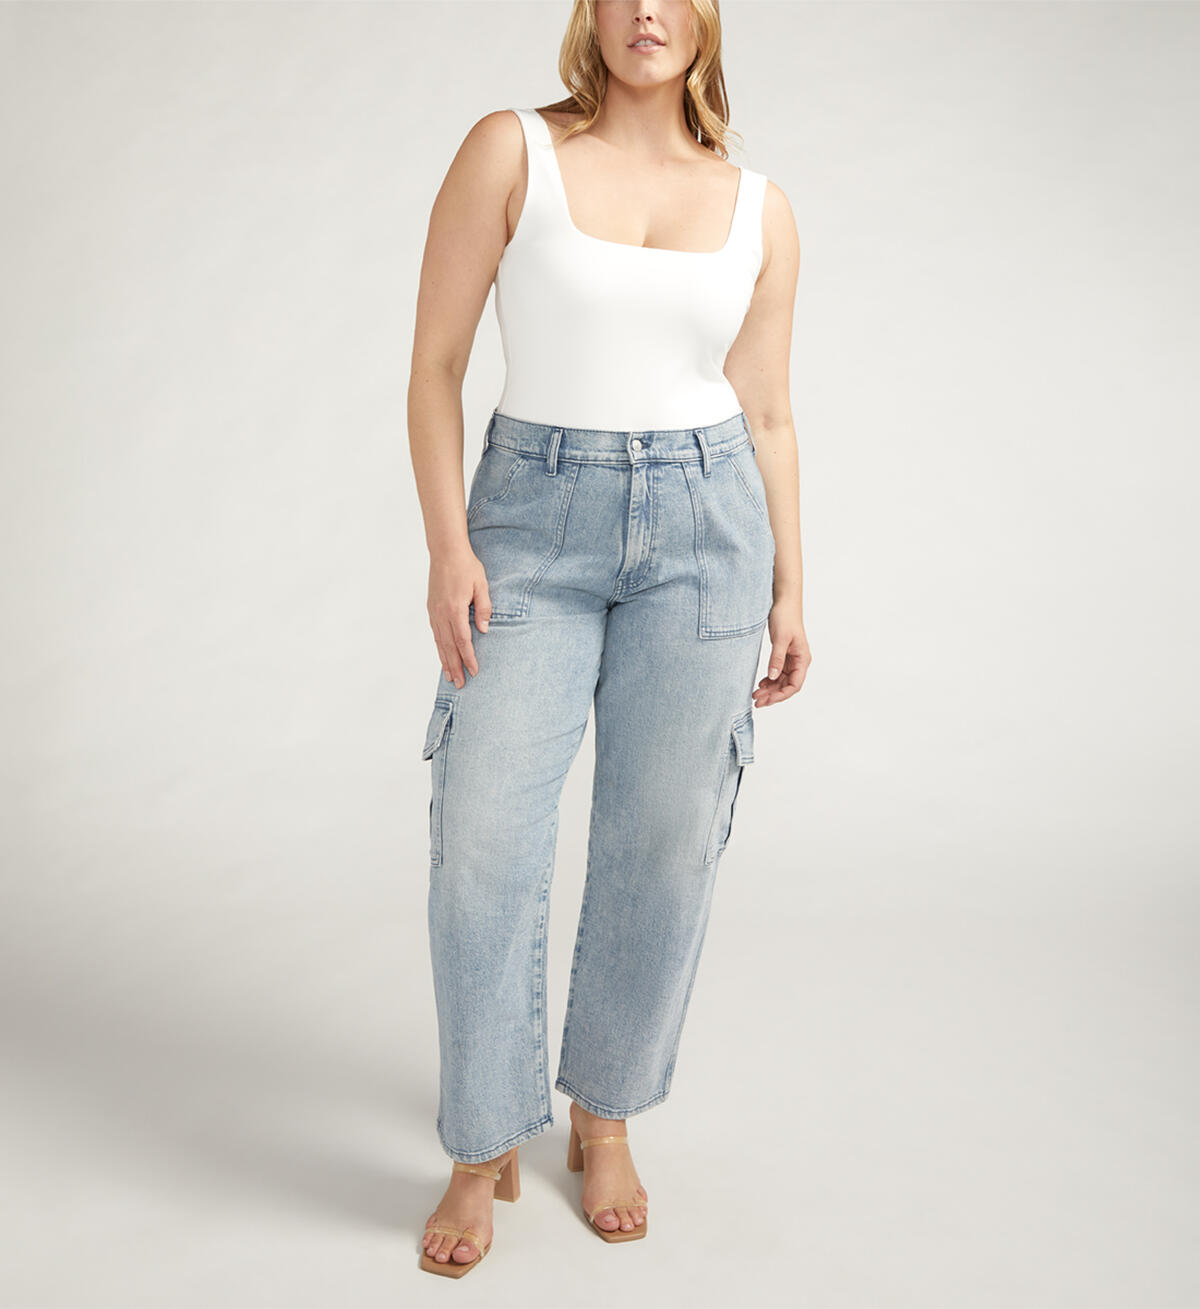 Utility Cargo Jeans Plus Size, , hi-res image number 0